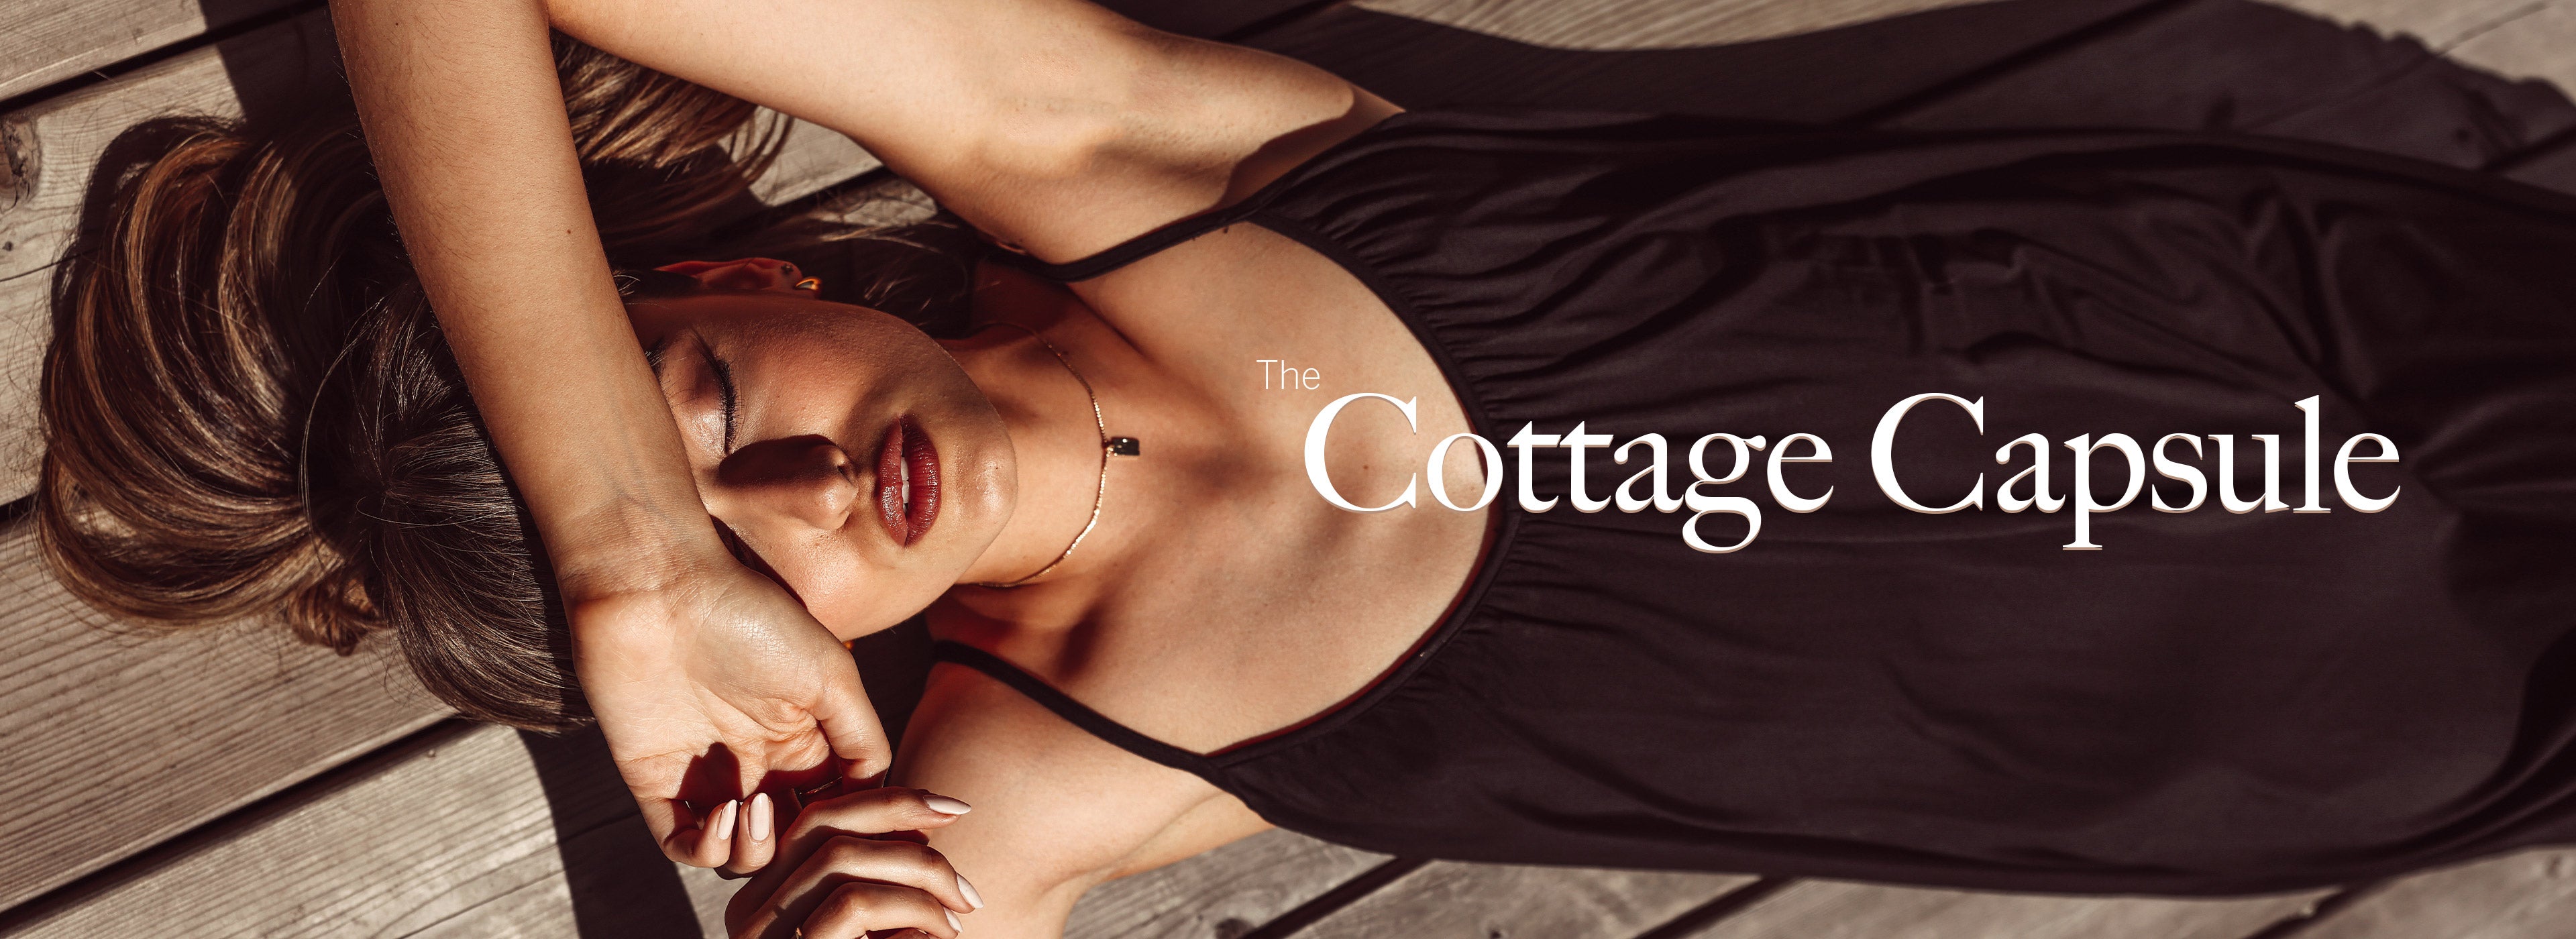 The Cottage Capsule